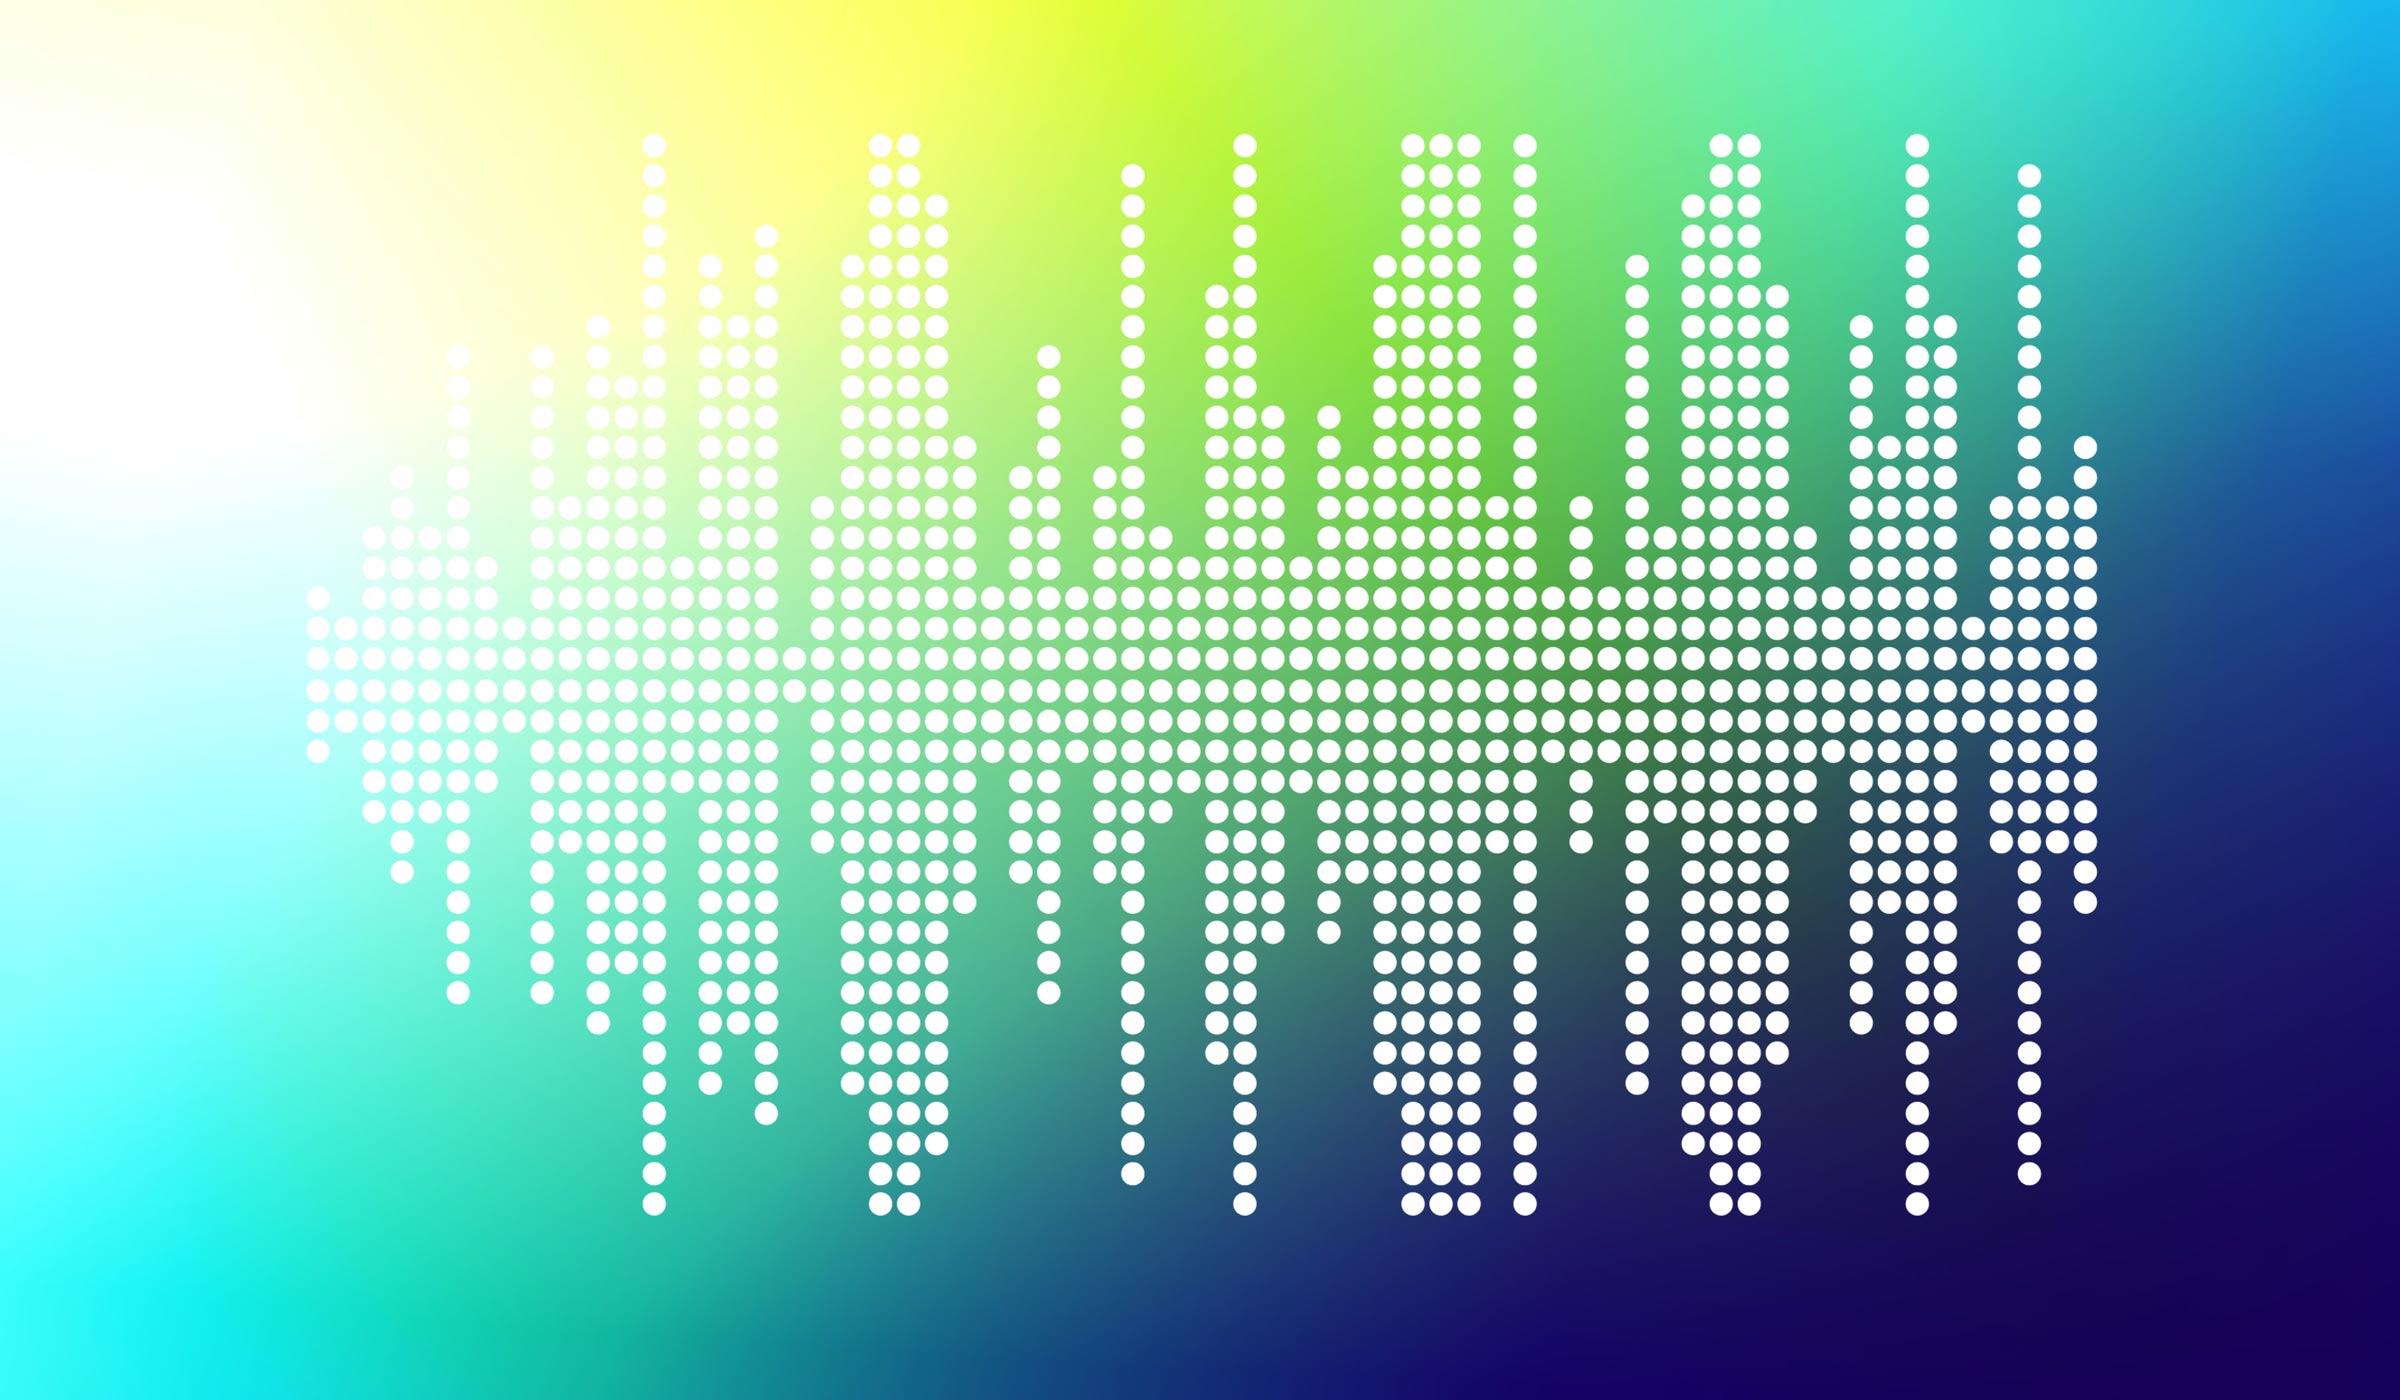 Colored dots arranged in a sound wave shape